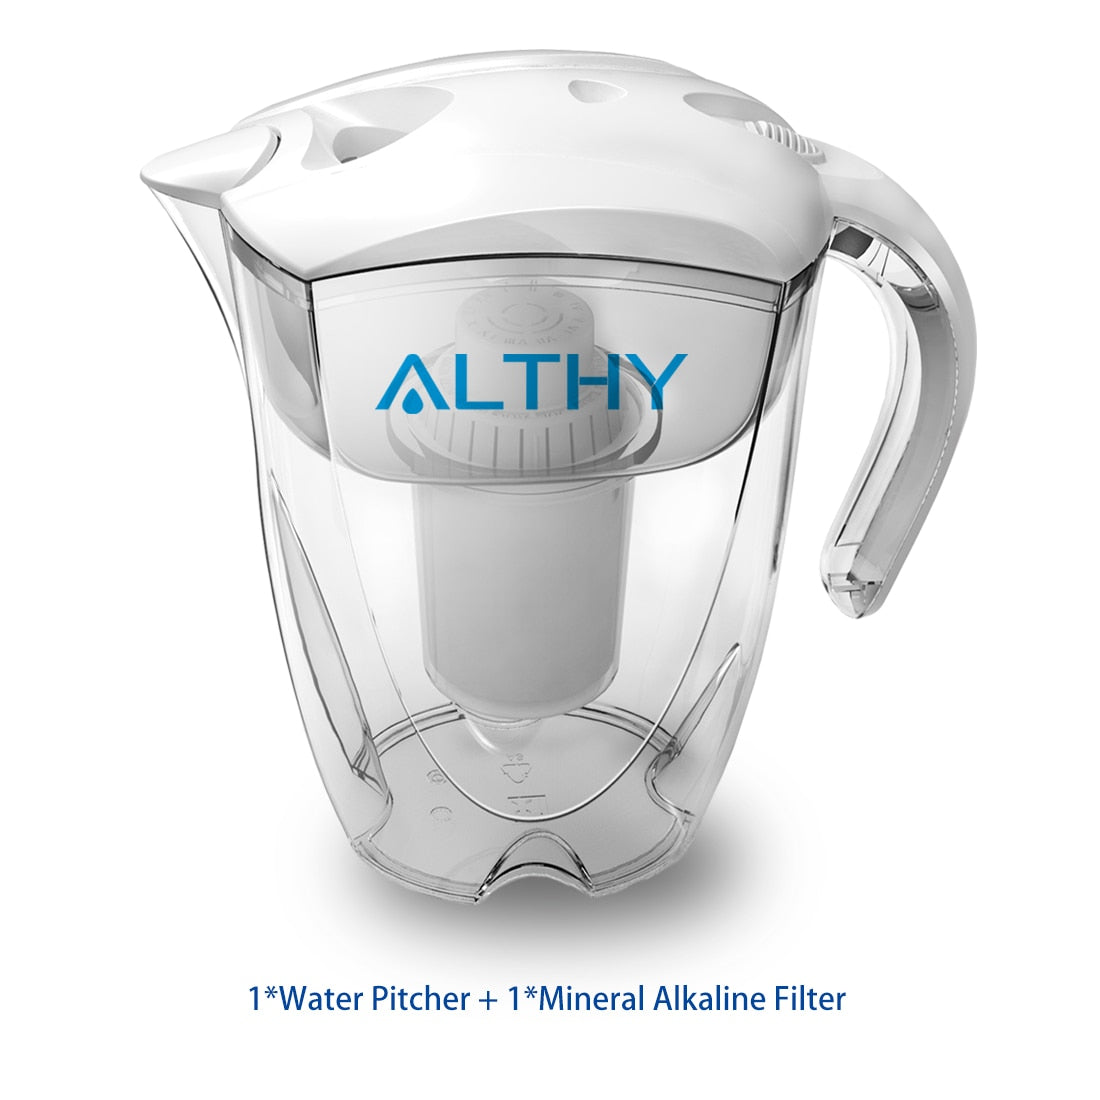 ALTHY 3.5L Mineral Alkaline Water Pitcher Filter - 400L Long-Life Filters - Alkalizer Purifier Filtration System +pH -ORP PitcherandFilterChina Hardware > Plumbing > Water Dispensing & Filtration 115.16 EZYSELLA SHOP